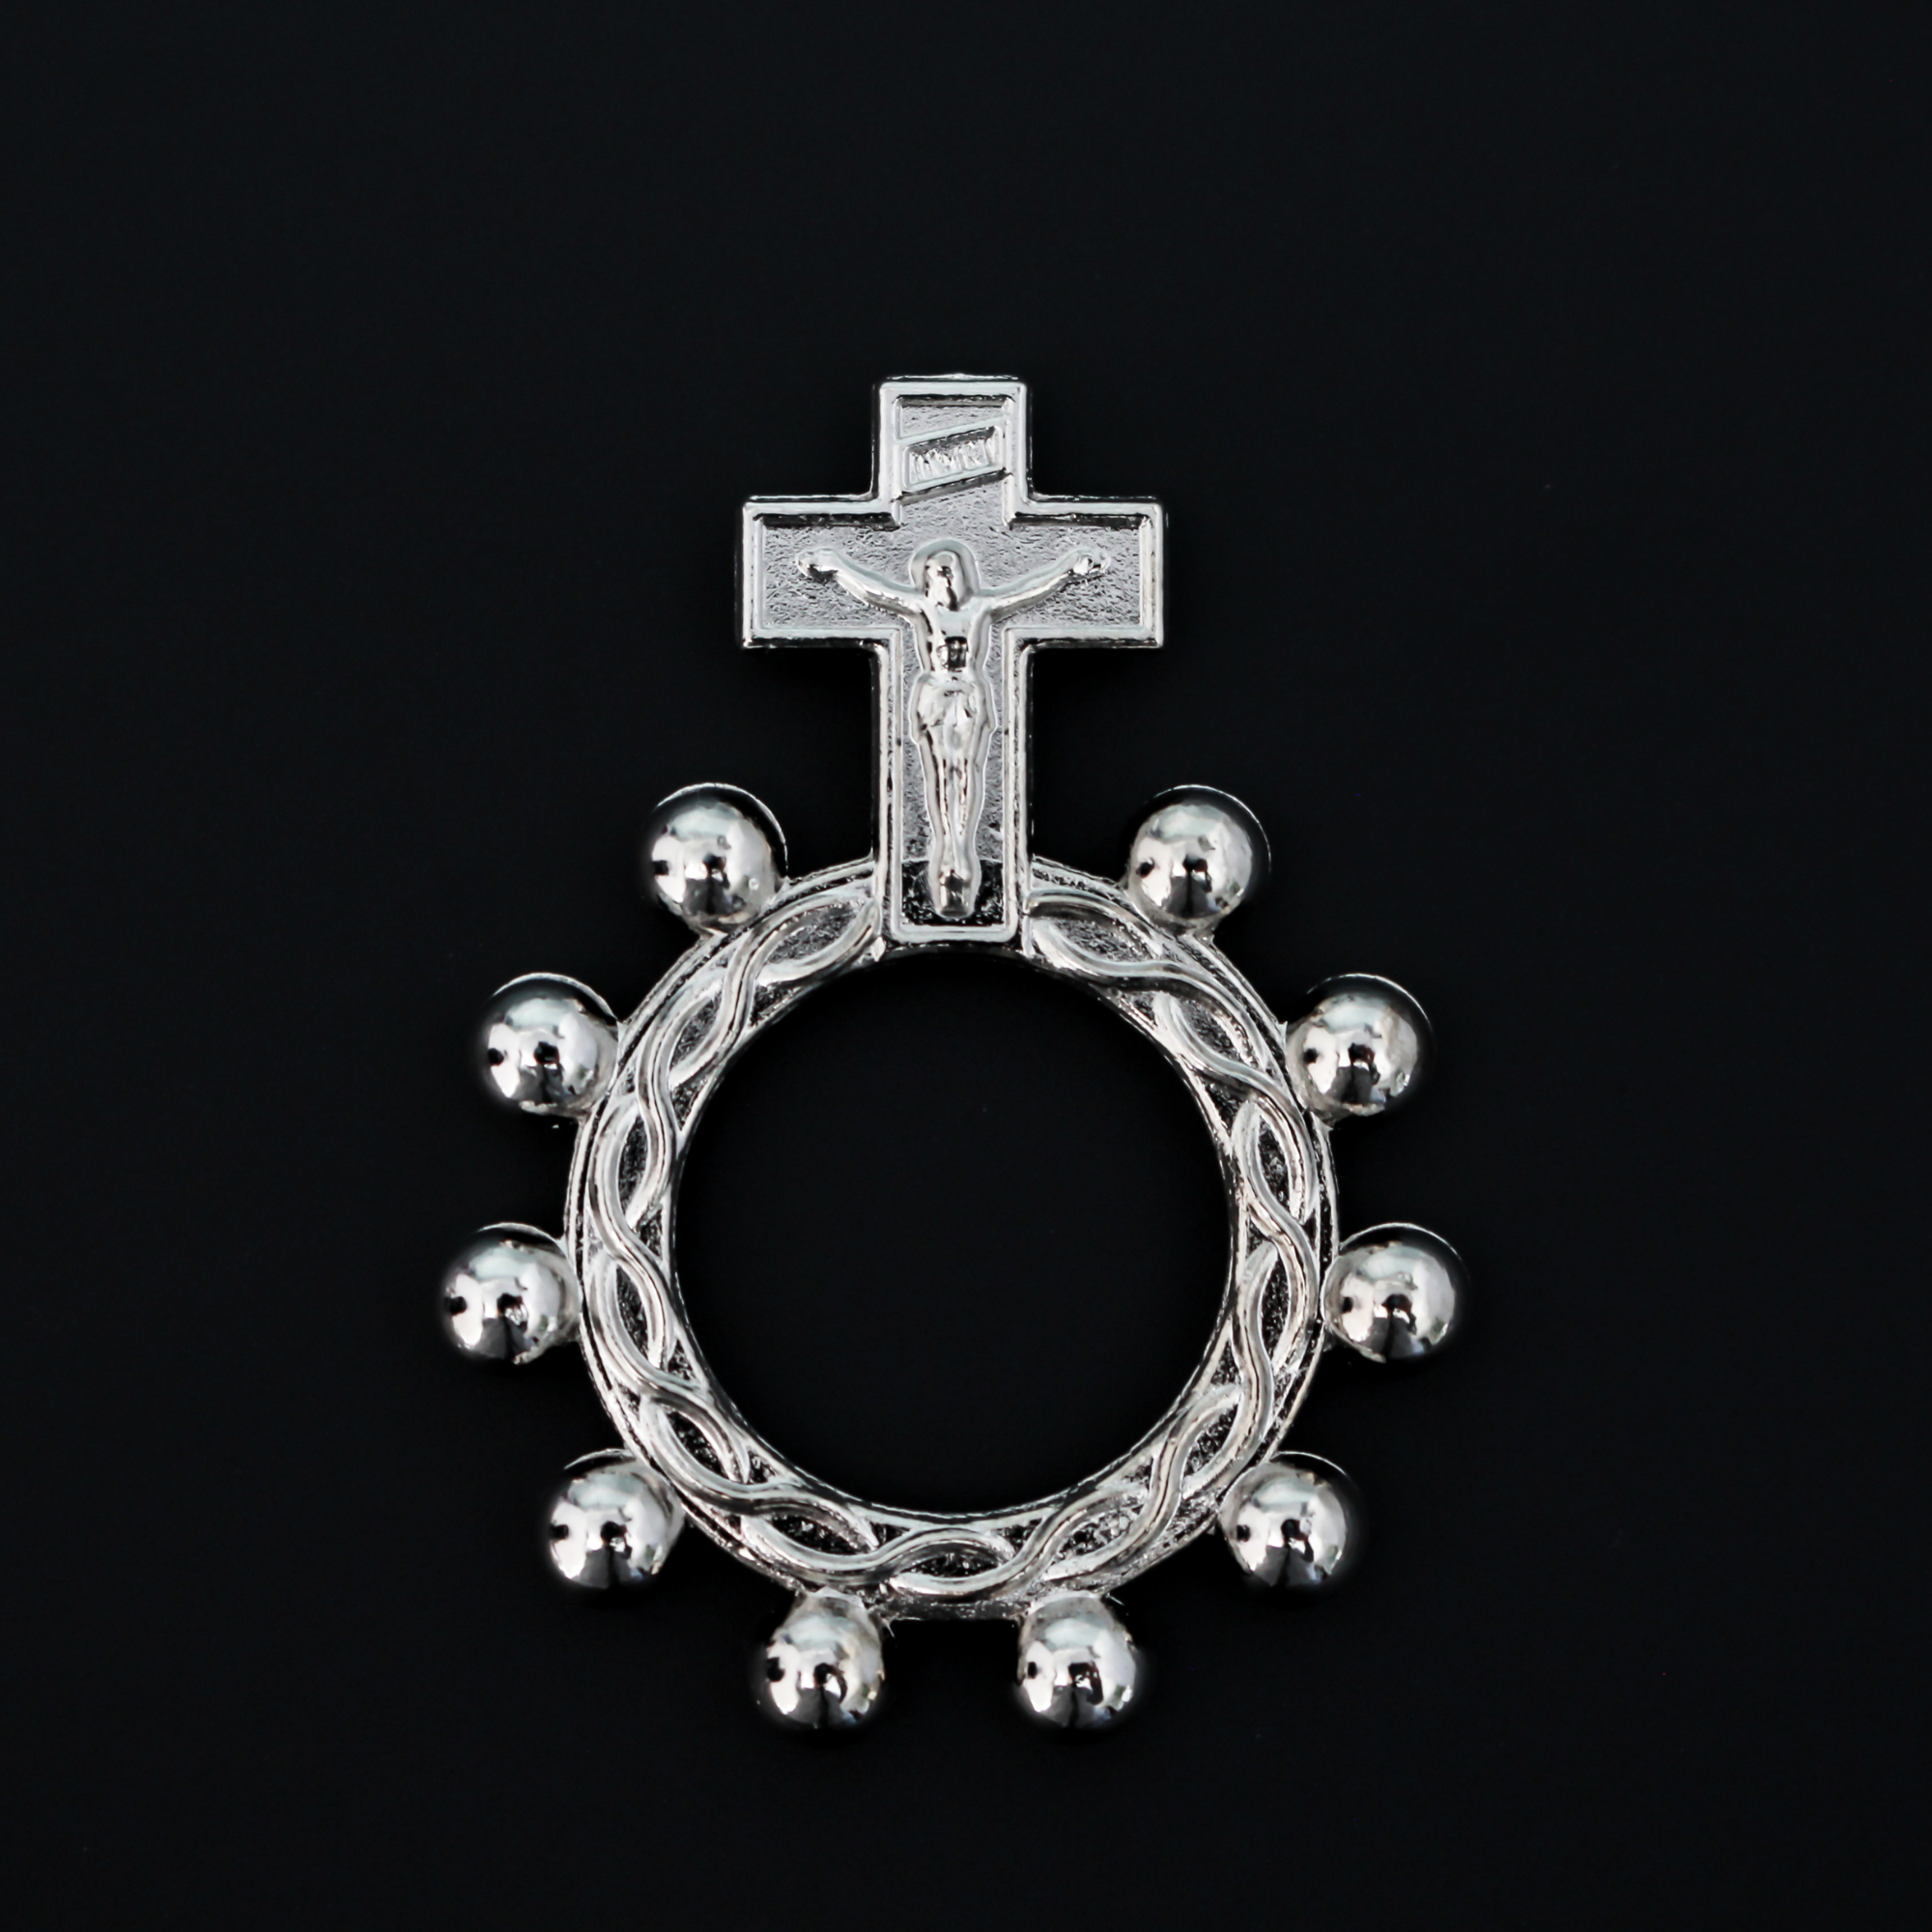 One decade rosary that features a Crucifix Cross at the top, 1 3/4 inches long.